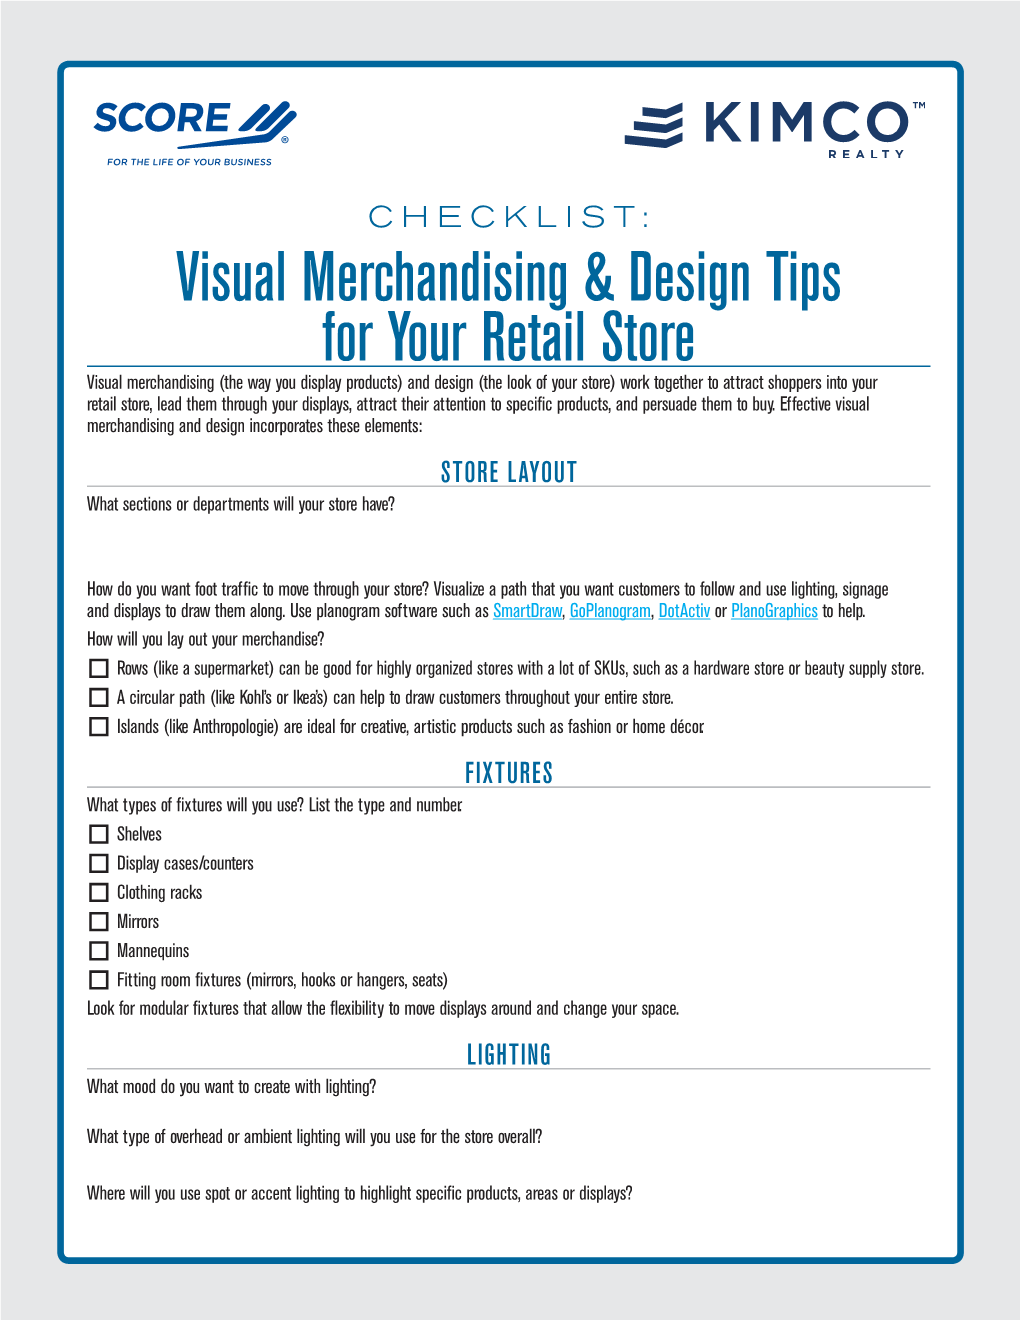 Visual Merchandising & Design Tips for Your Retail Store